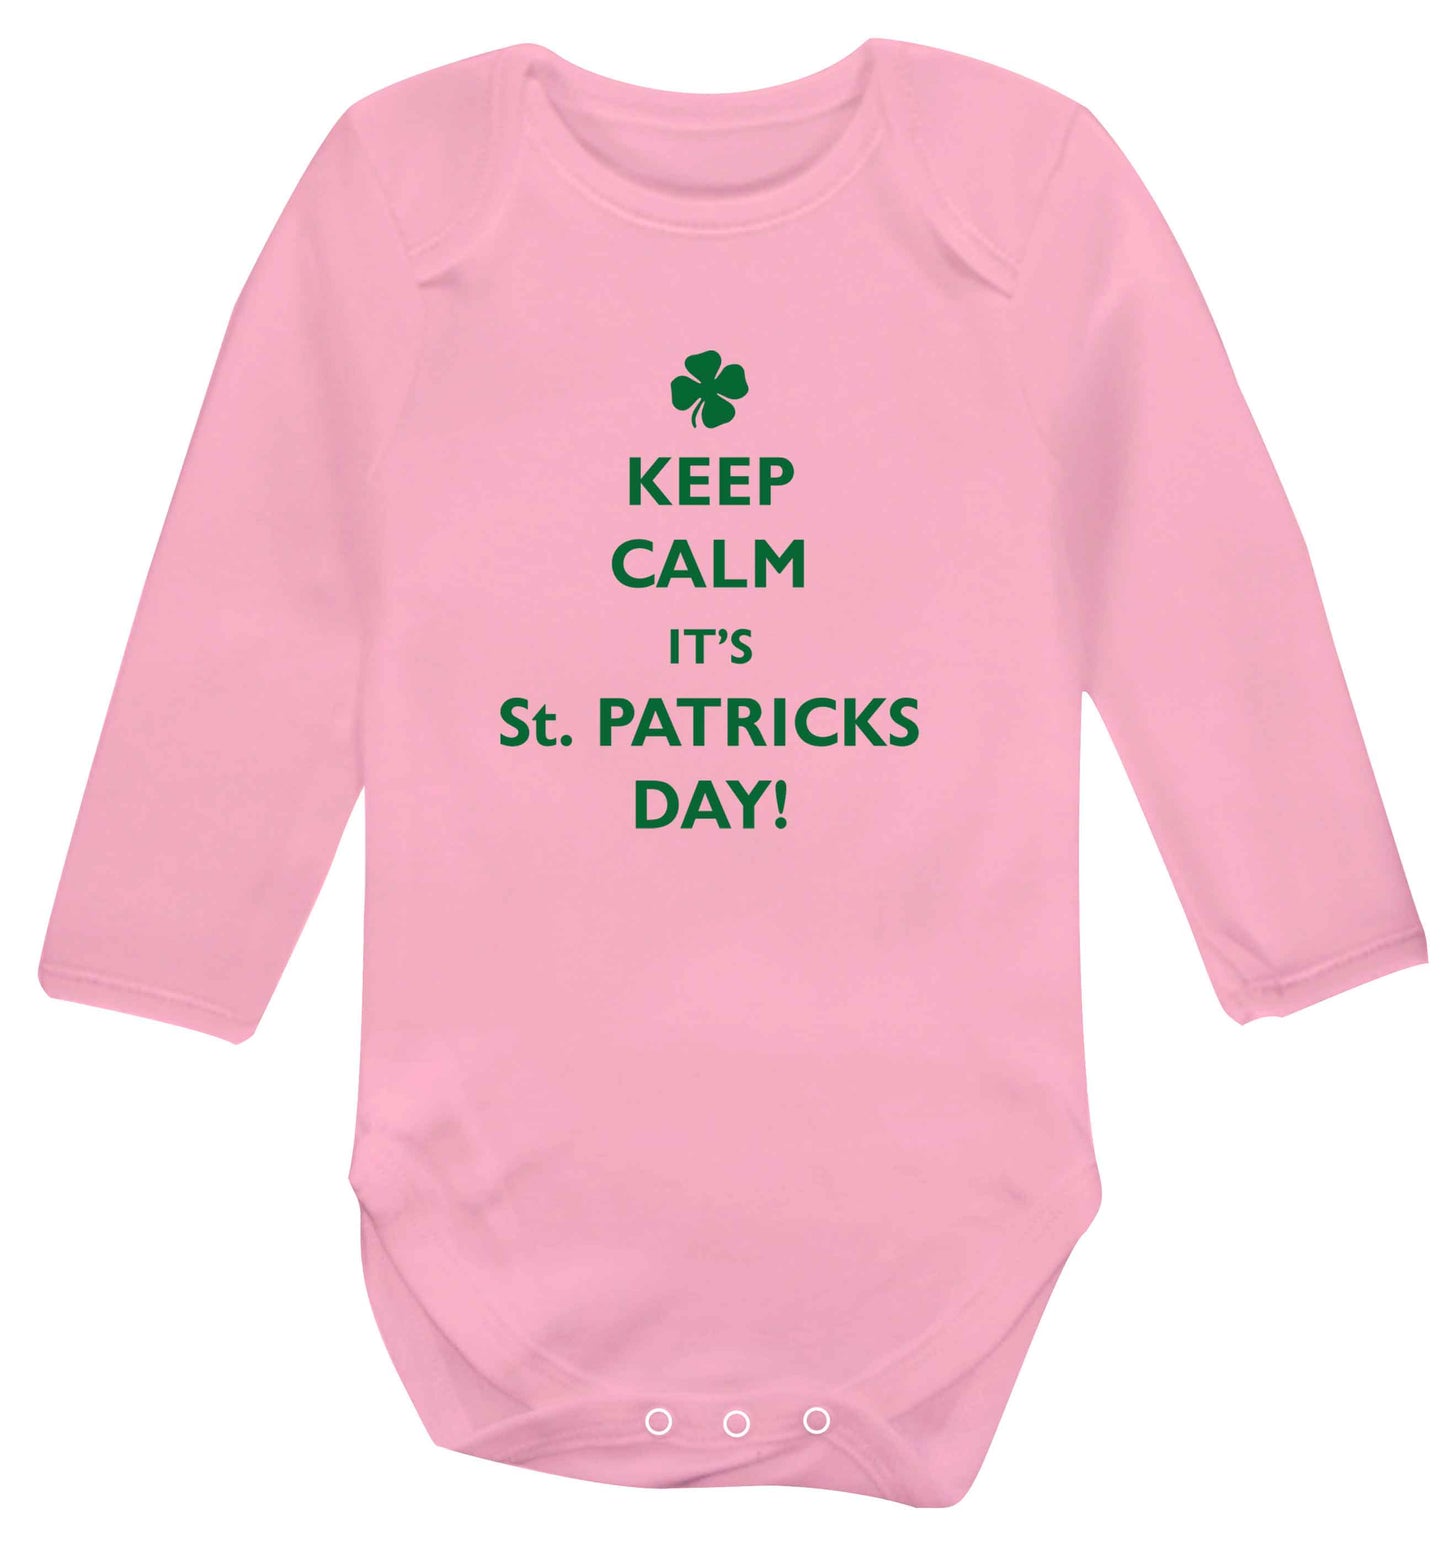 Keep calm it's St.Patricks day baby vest long sleeved pale pink 6-12 months